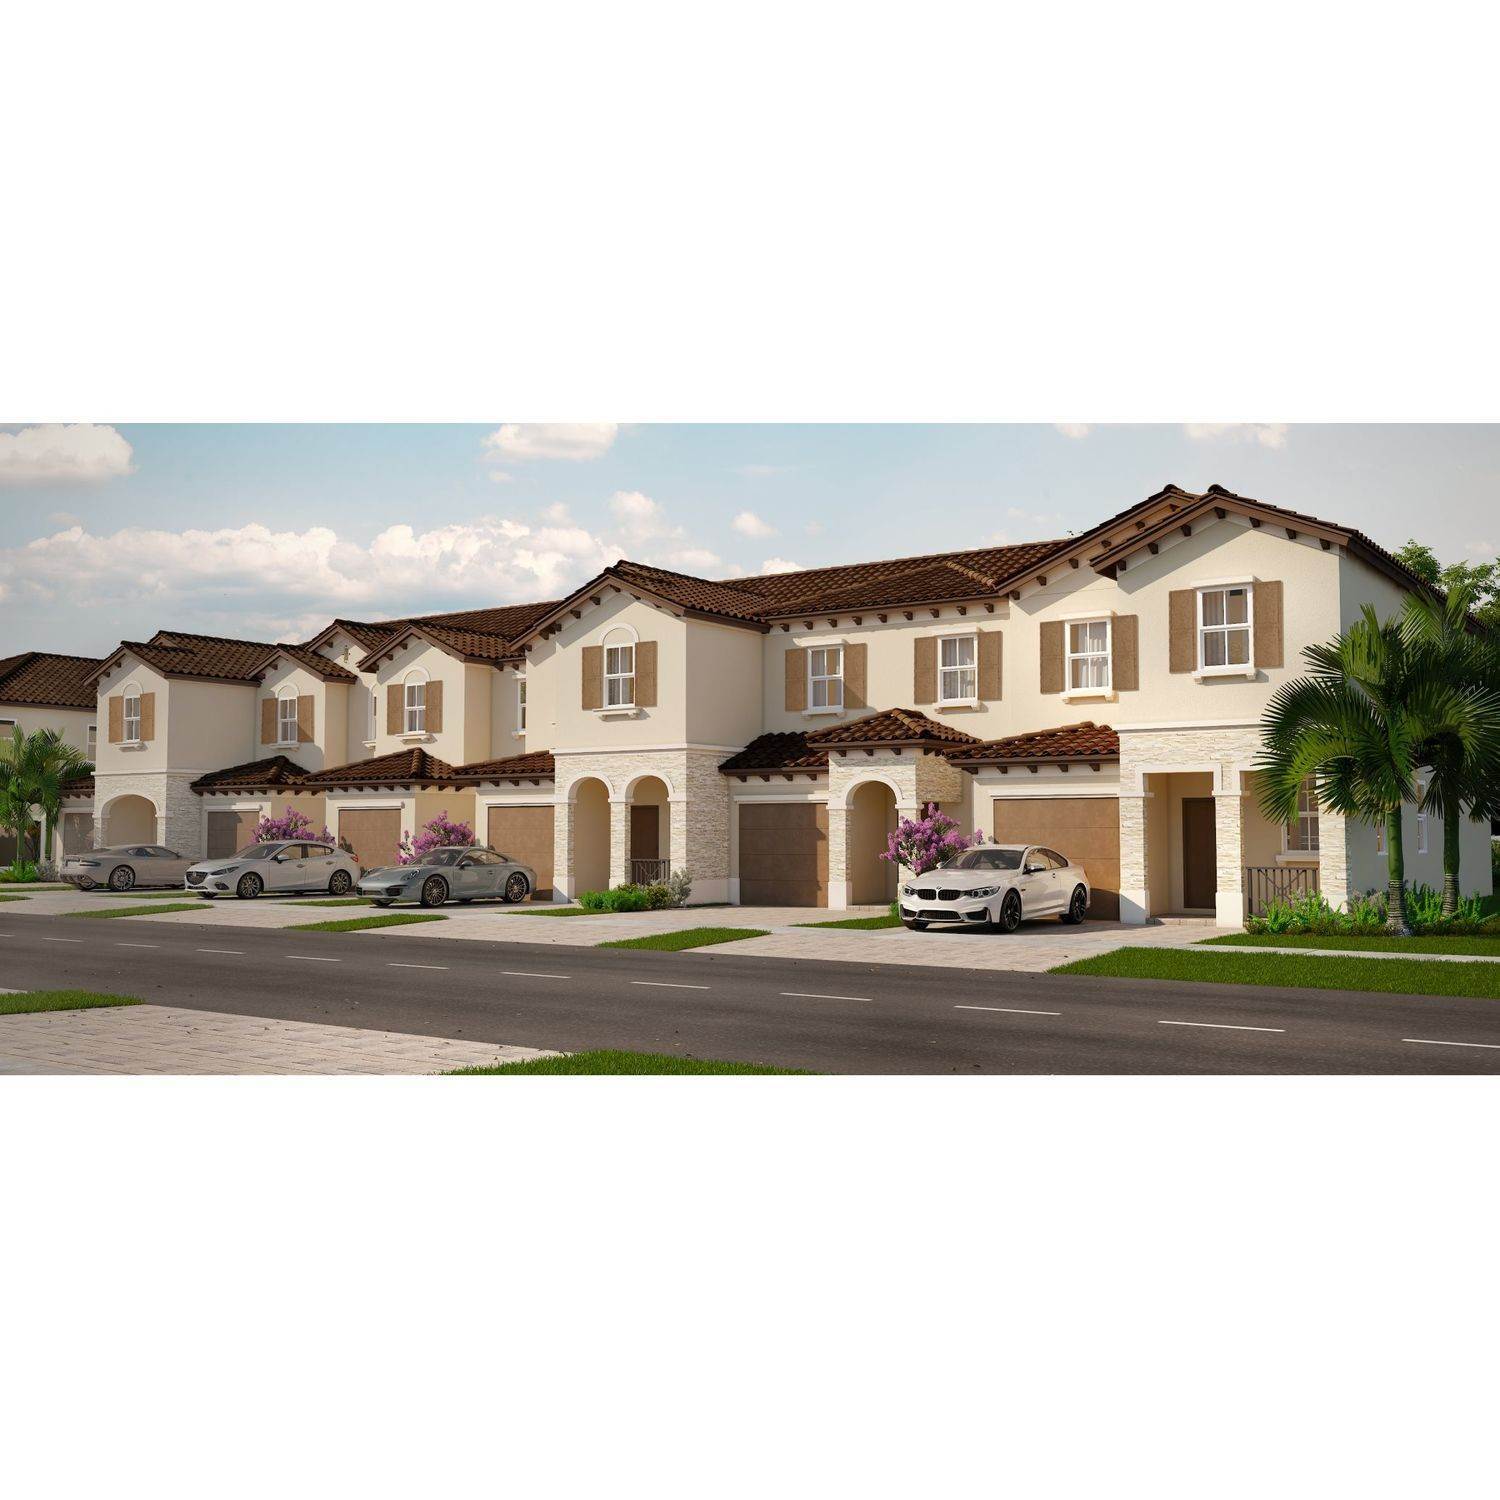 9. Westview - Nantucket Collection xây dựng tại 2601 NW 119 Street, Miami, FL 33167